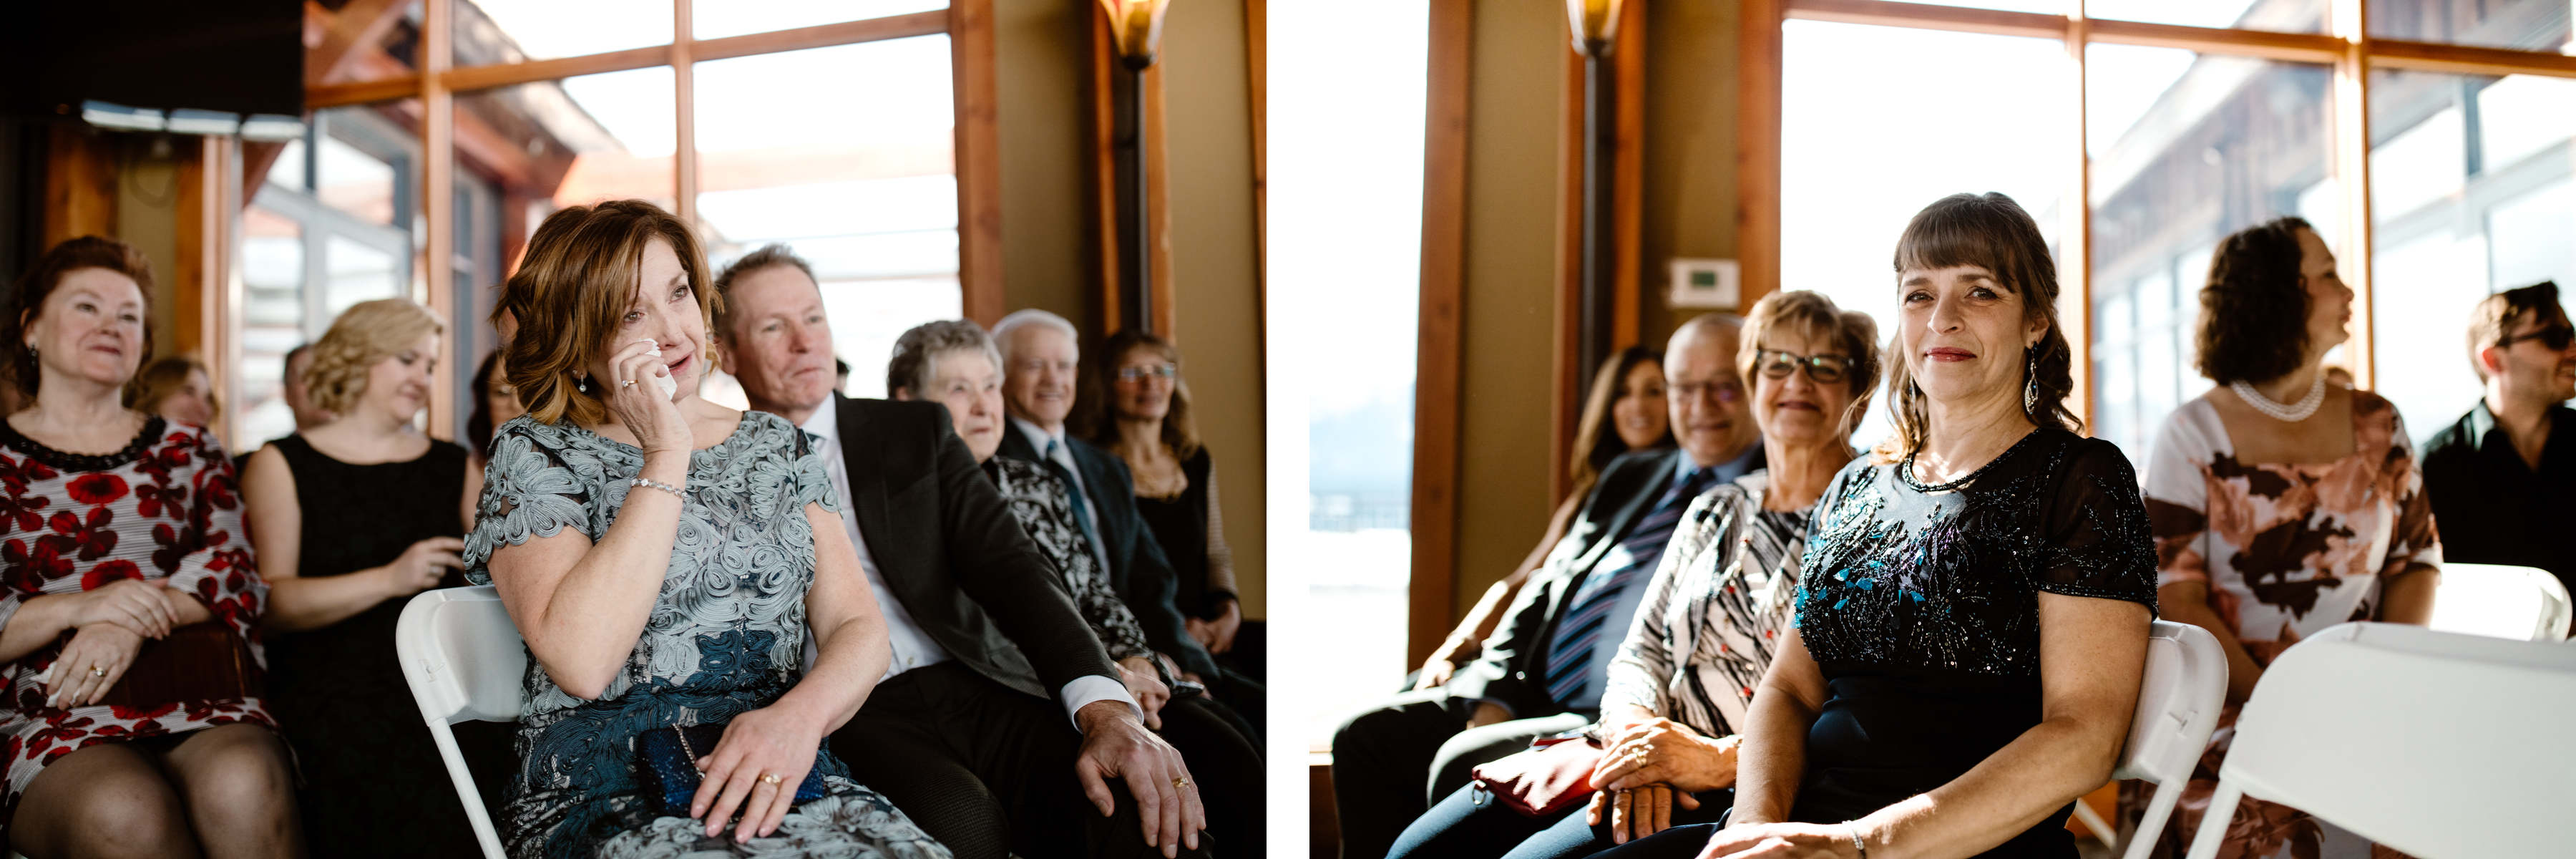 Invermere Wedding Photographers at Eagle Ranch and Panorama Ski Resort - Image 20